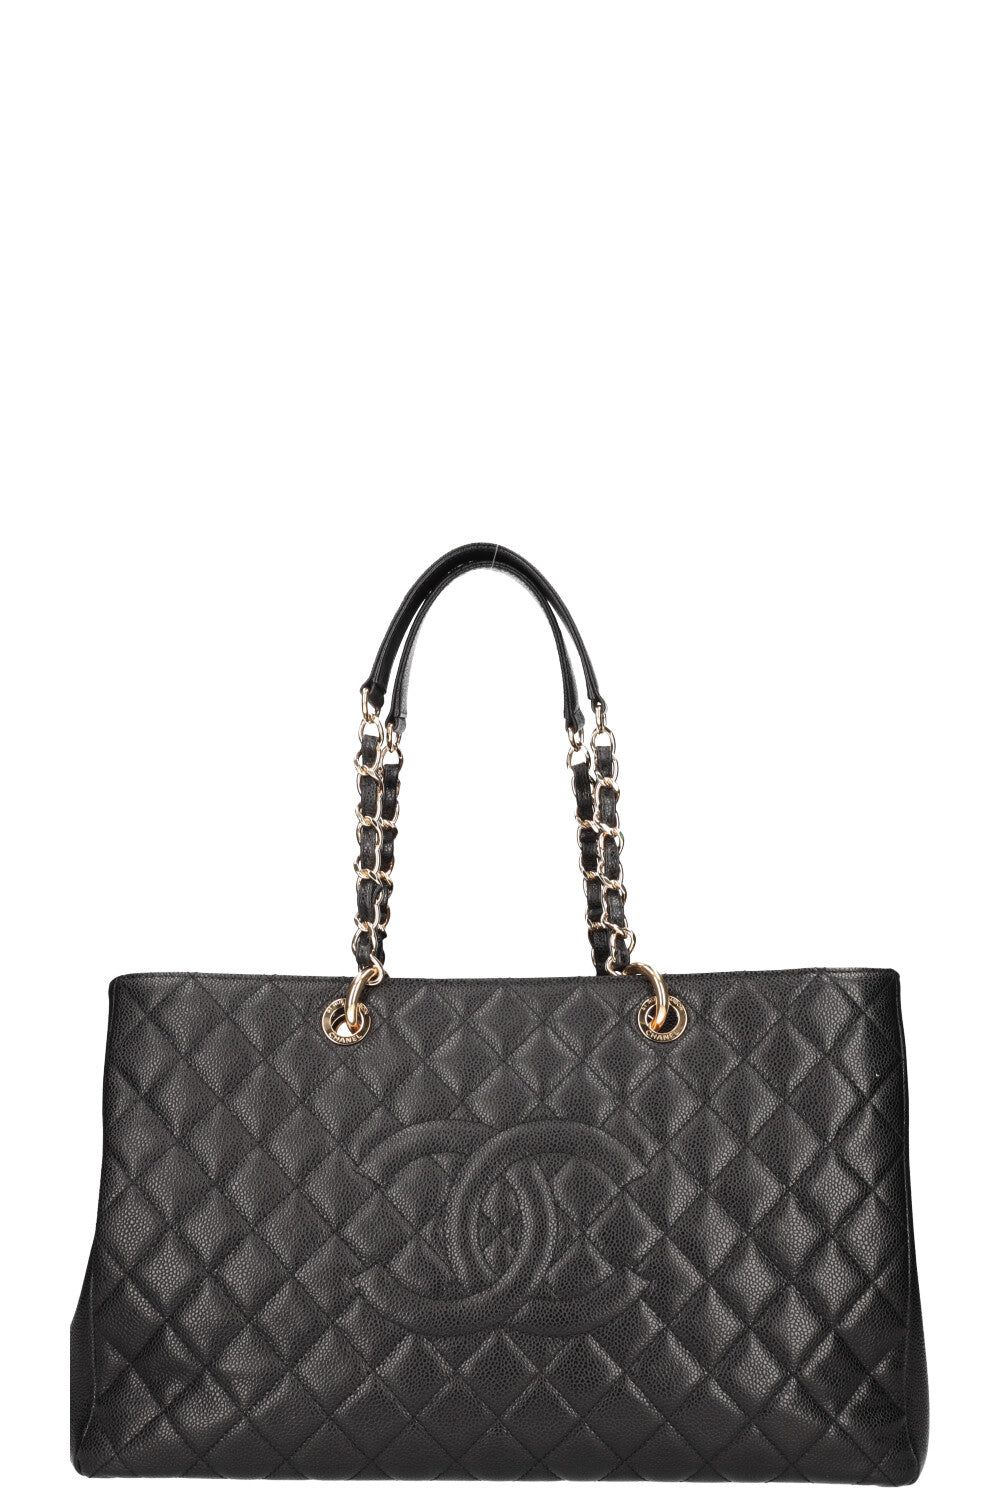 CHANEL Shopping Tote GST Bag Caviar Leather